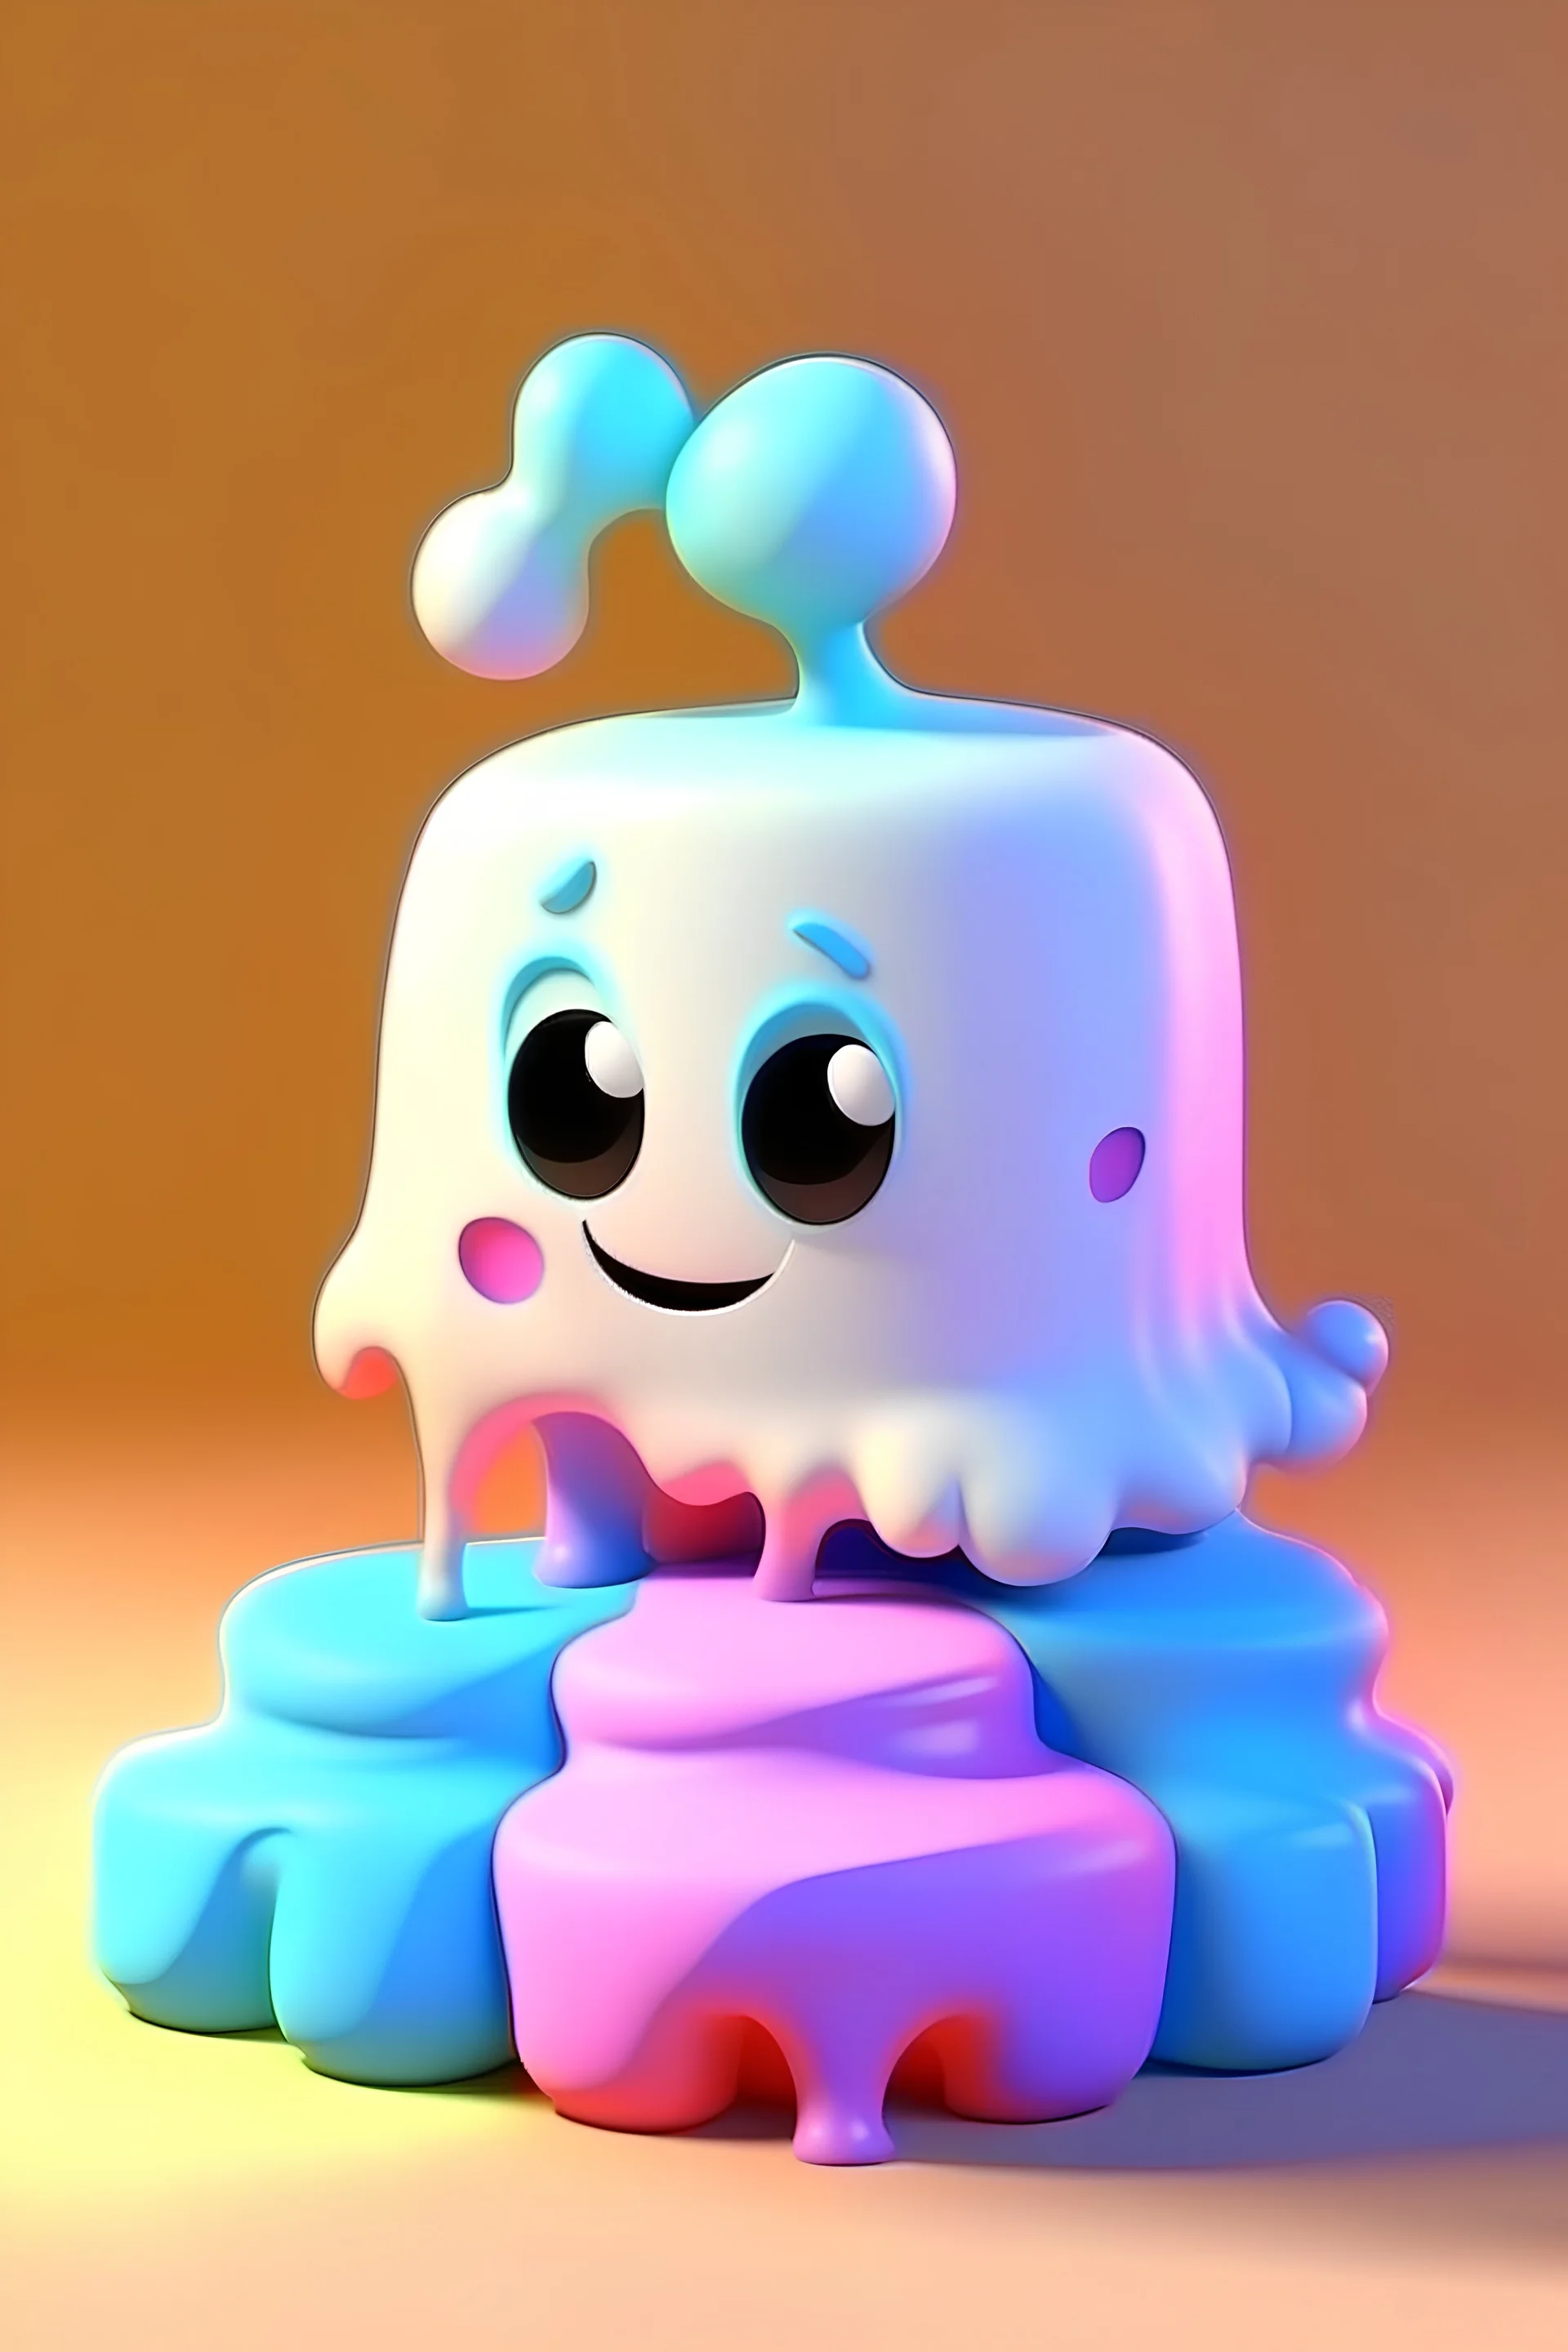 Pixar 3d, marshmallow melting and make the background to pastel color